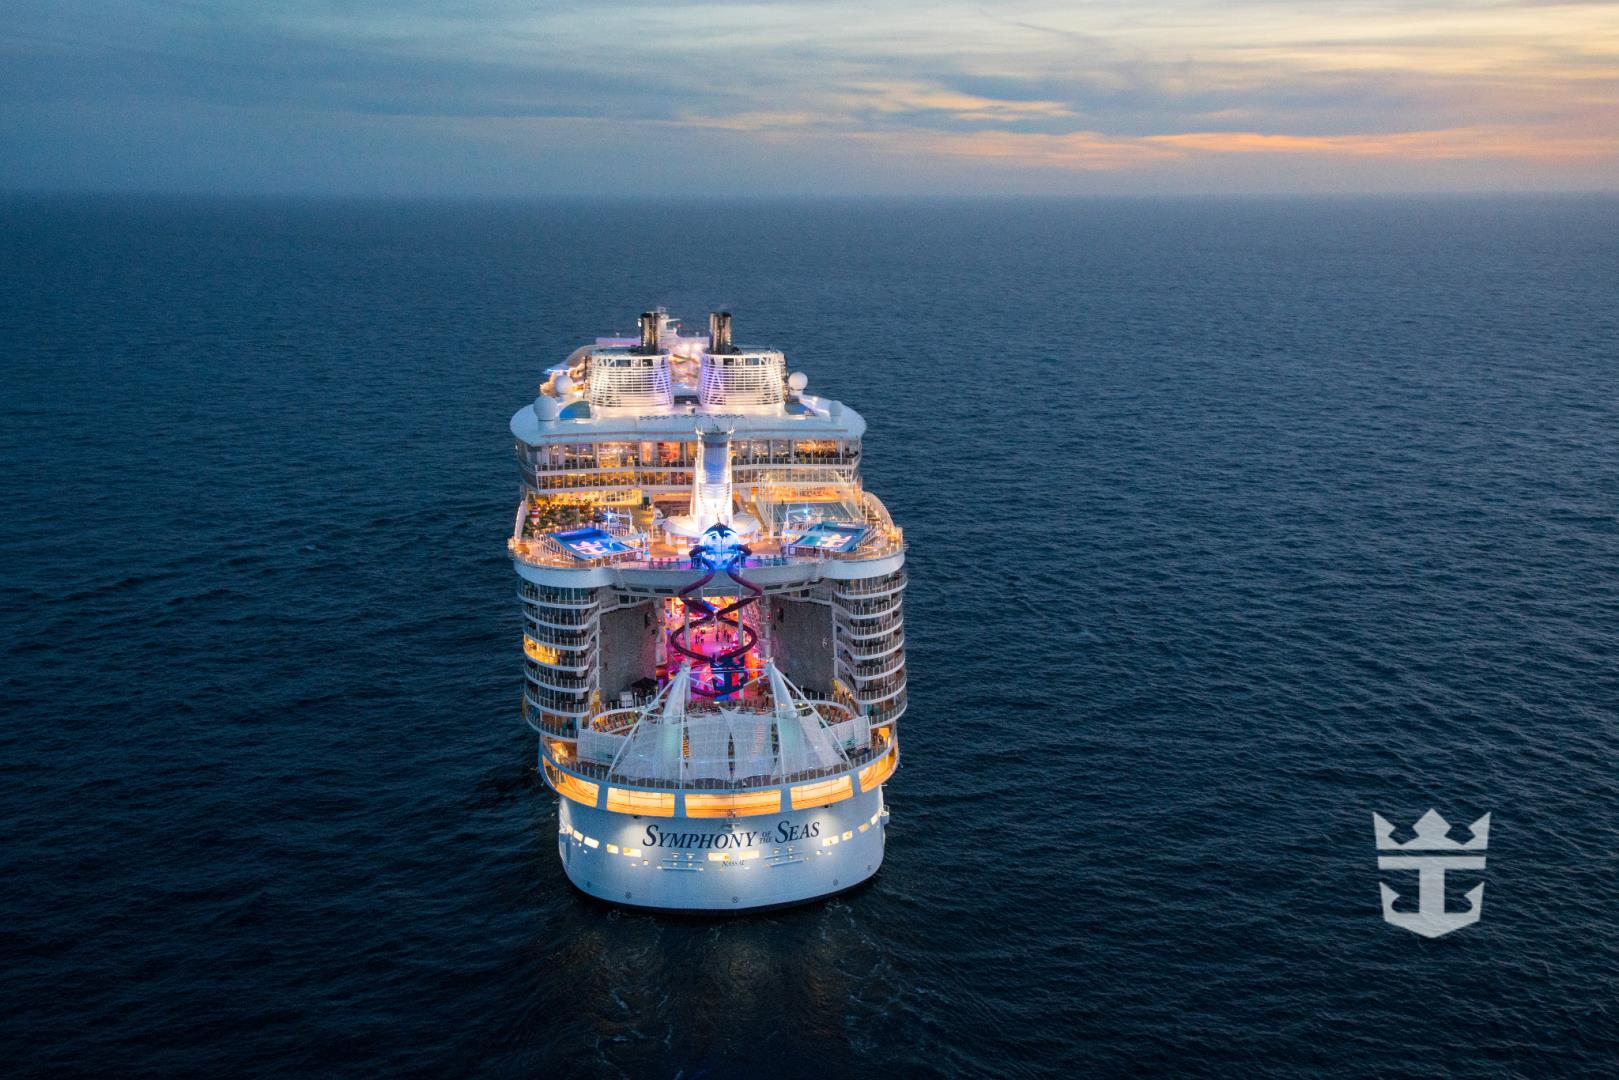 Aerial view of Symphony of the Seas at night offshore Barcelona, Spain